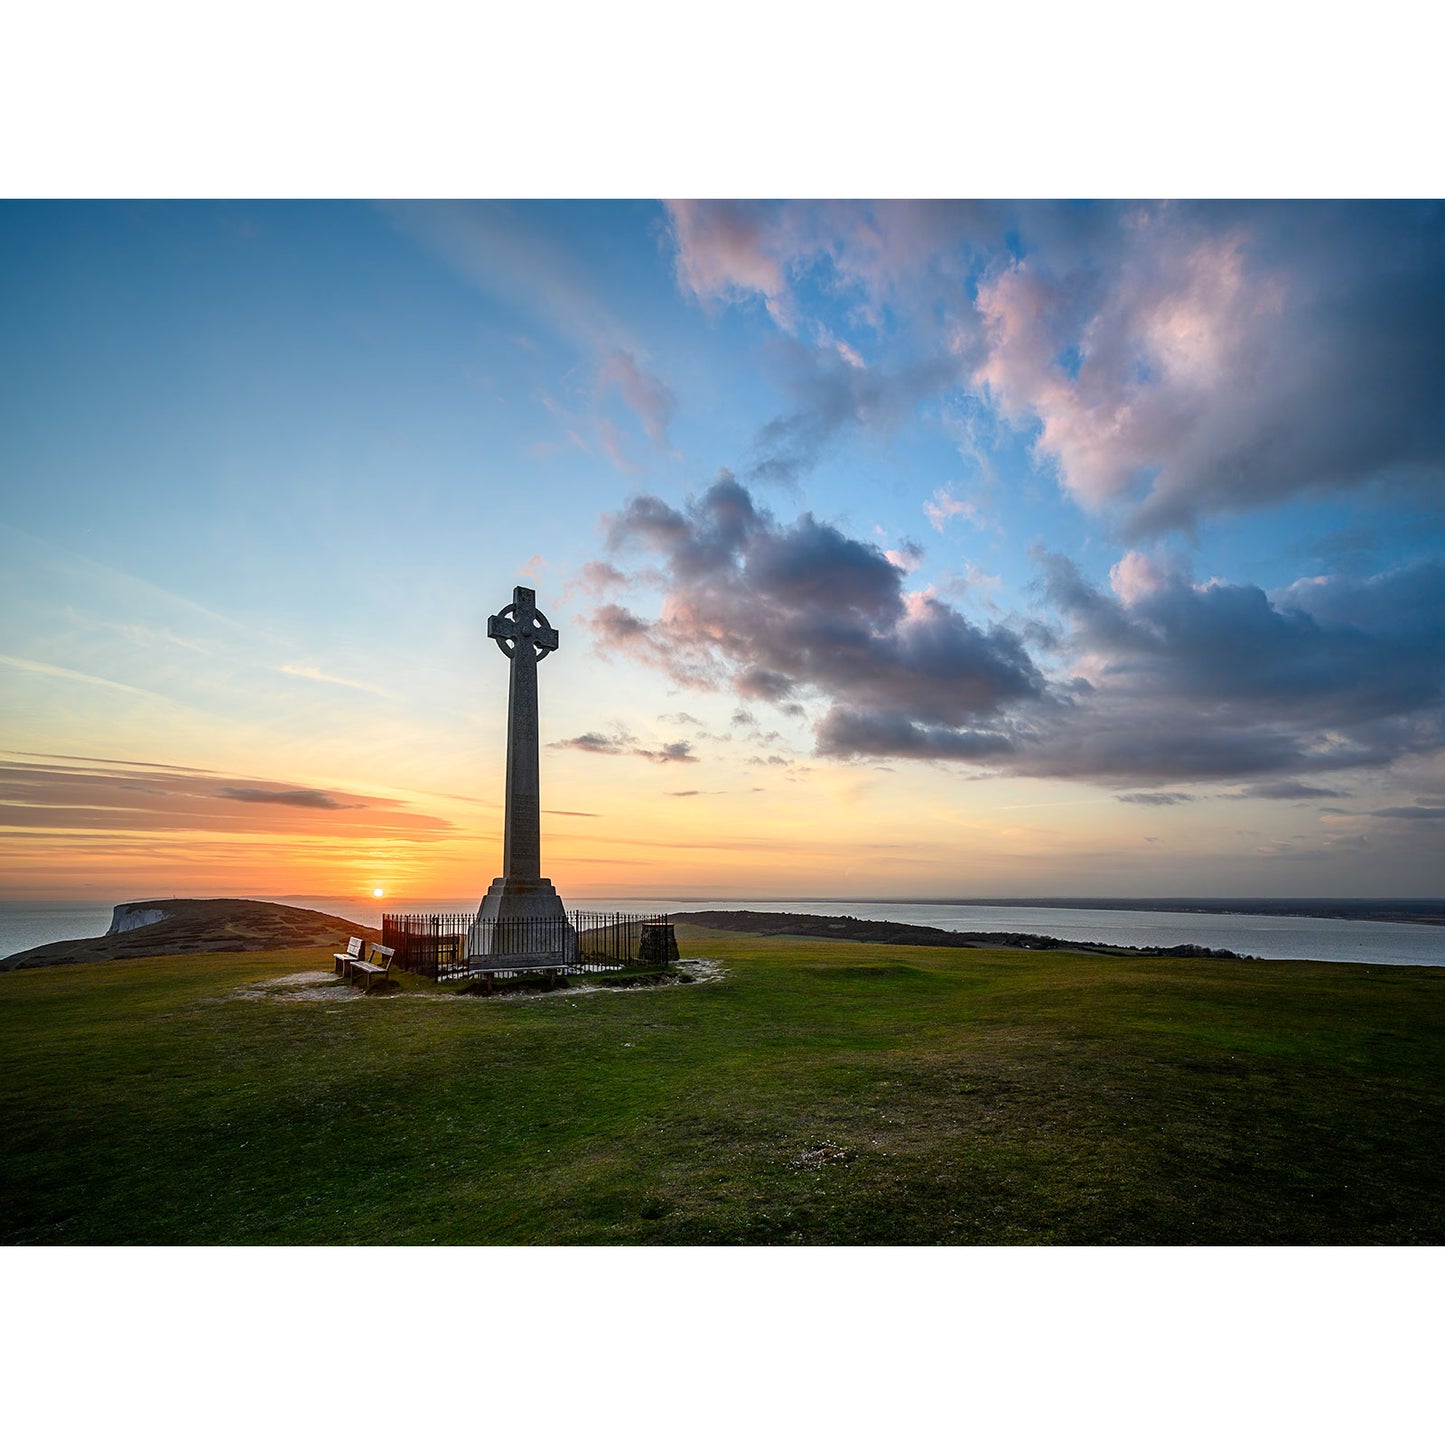 Sunset at the Tennyson Monument on Gascoigne Isle with expansive sky and scattered clouds by Available Light Photography.